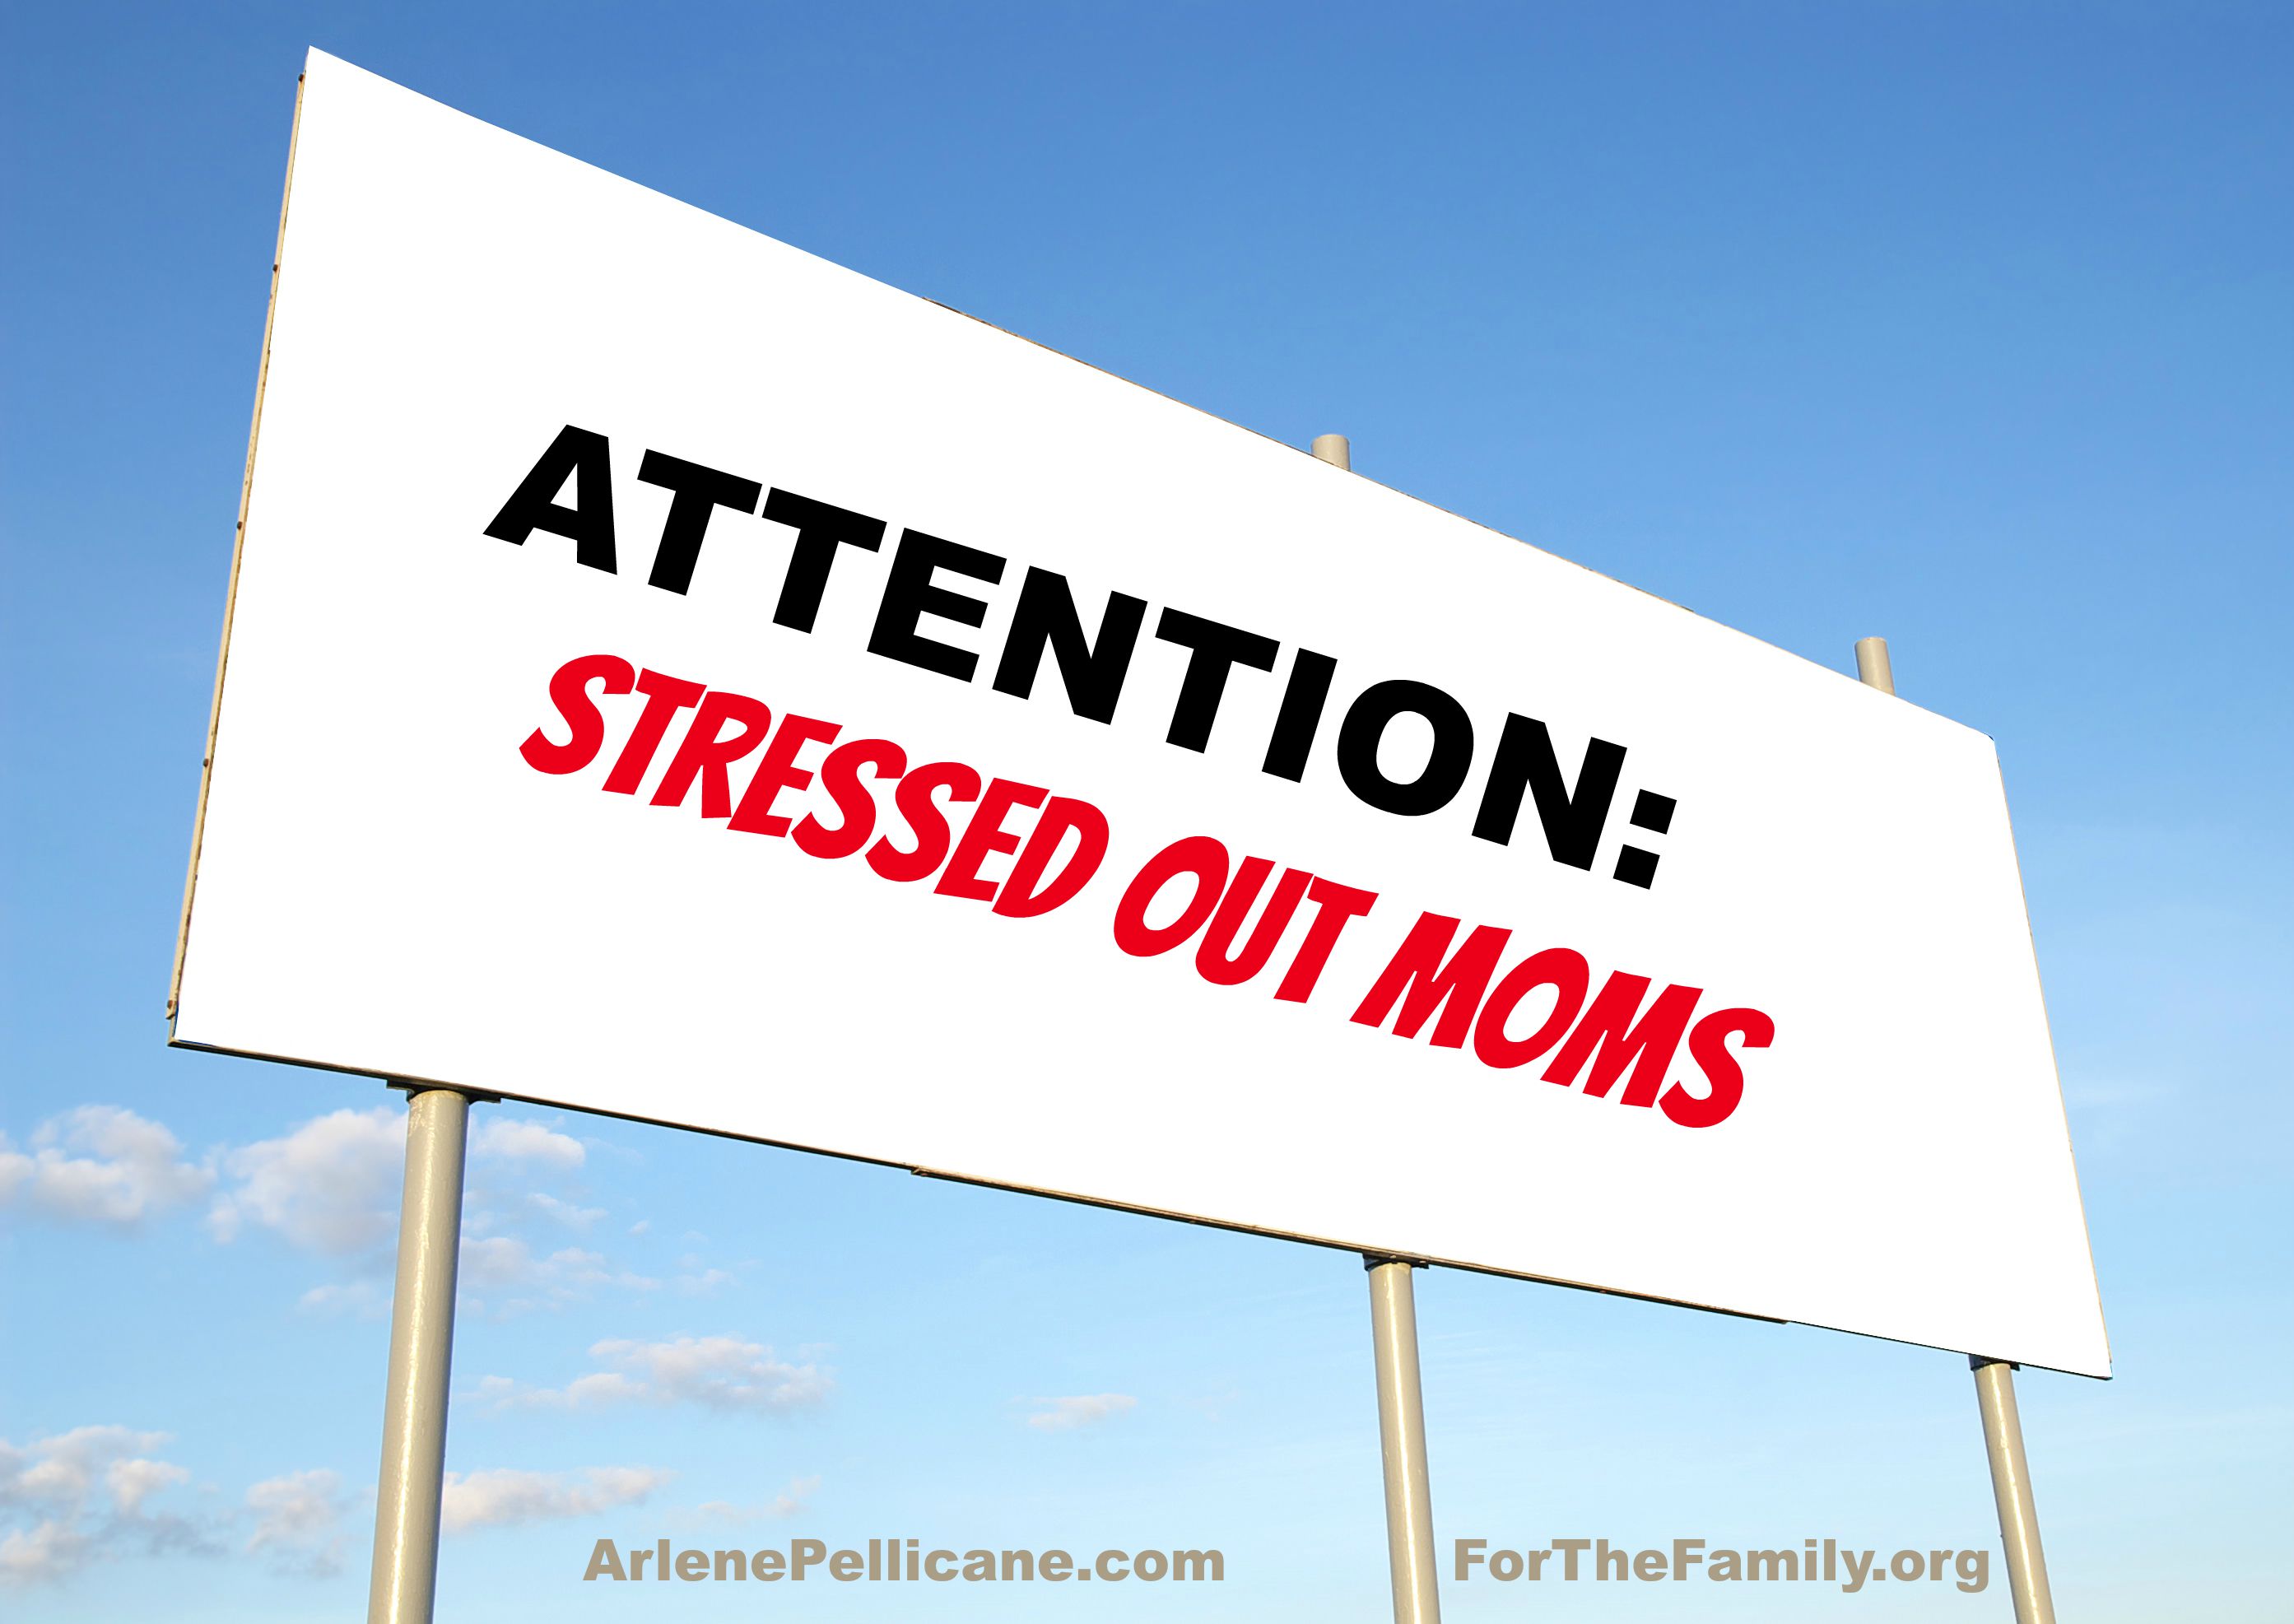 Attention Stressed Out Moms!